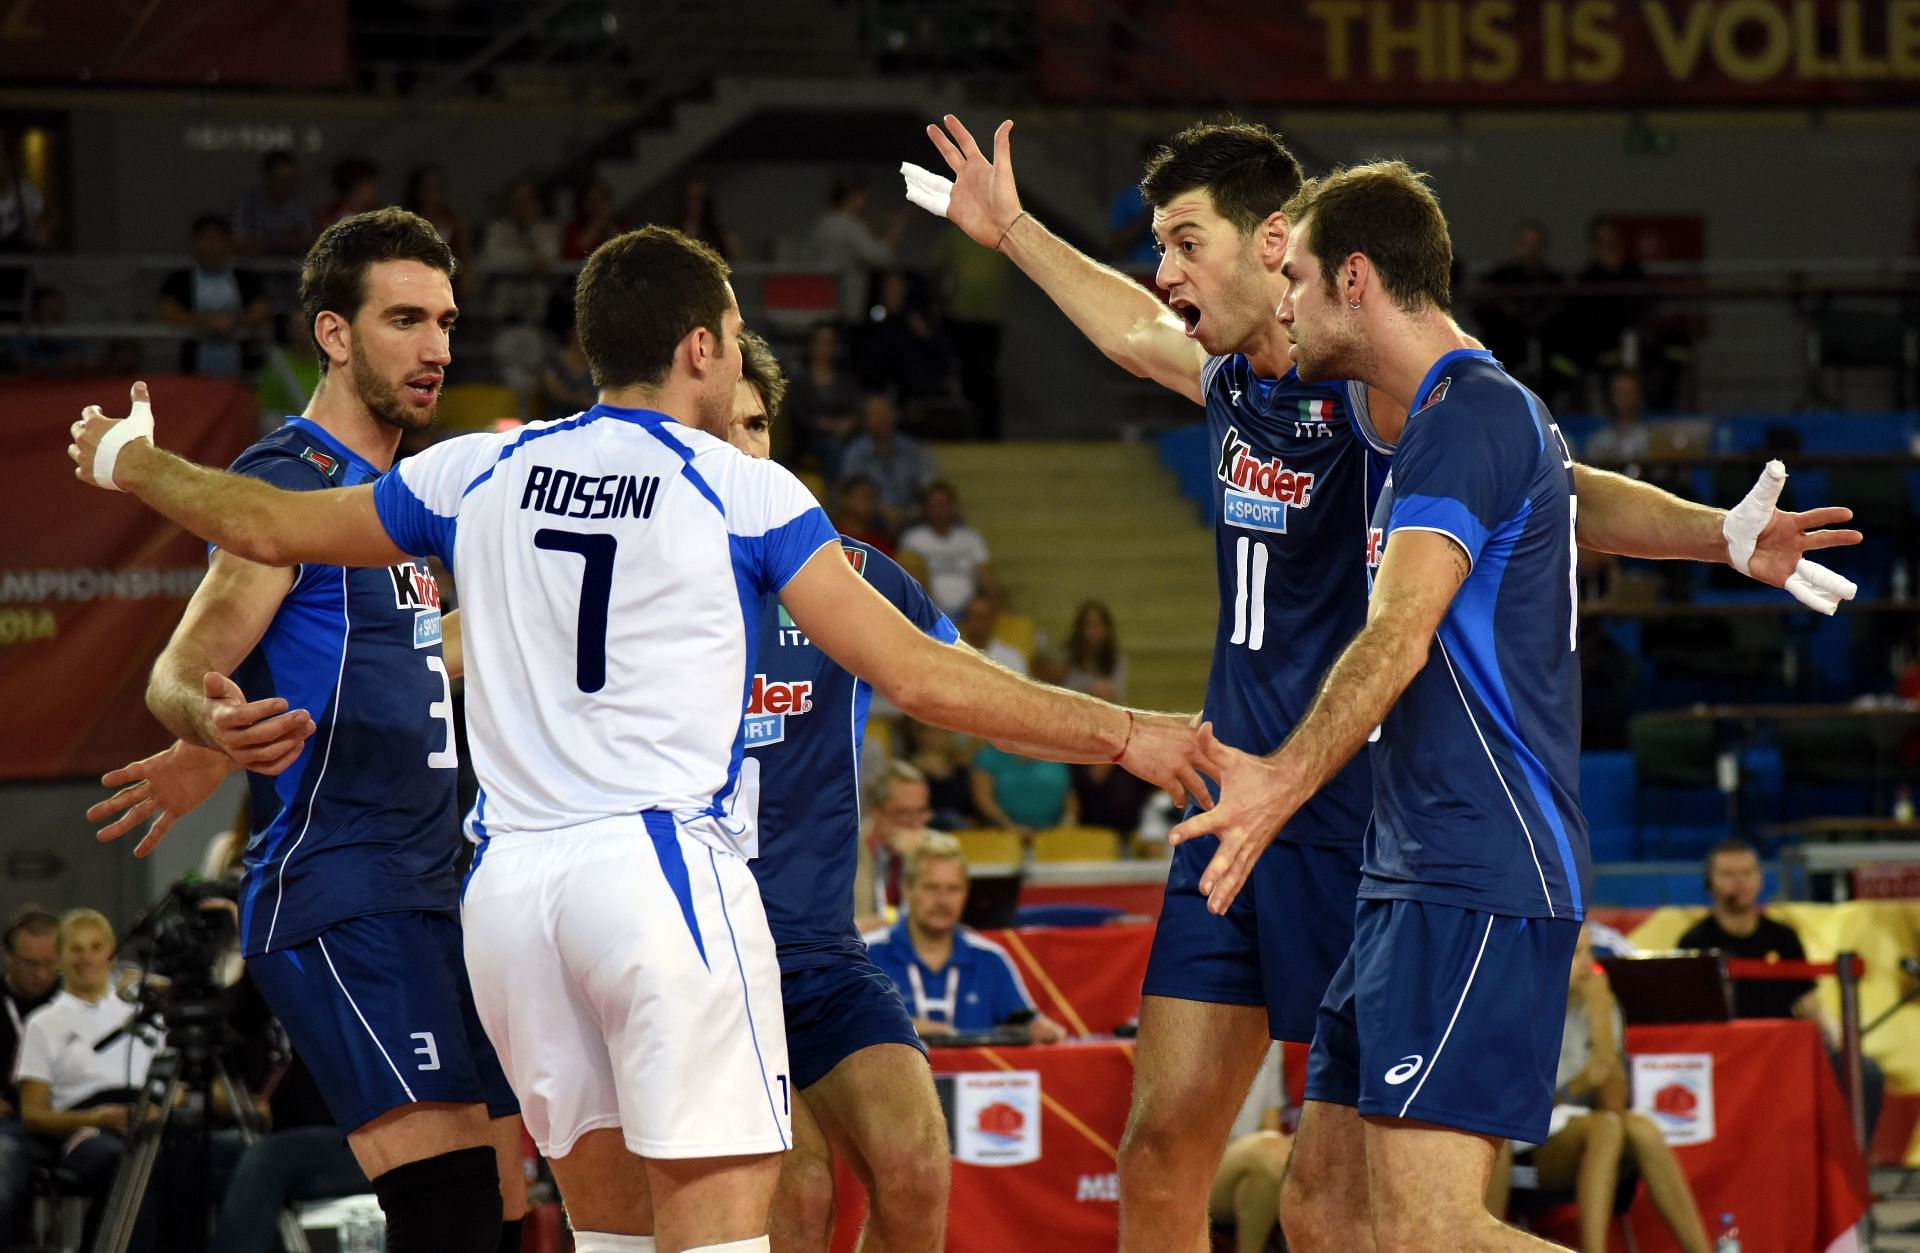 5 teams to watch at Volleyball Mens World Championship 2022